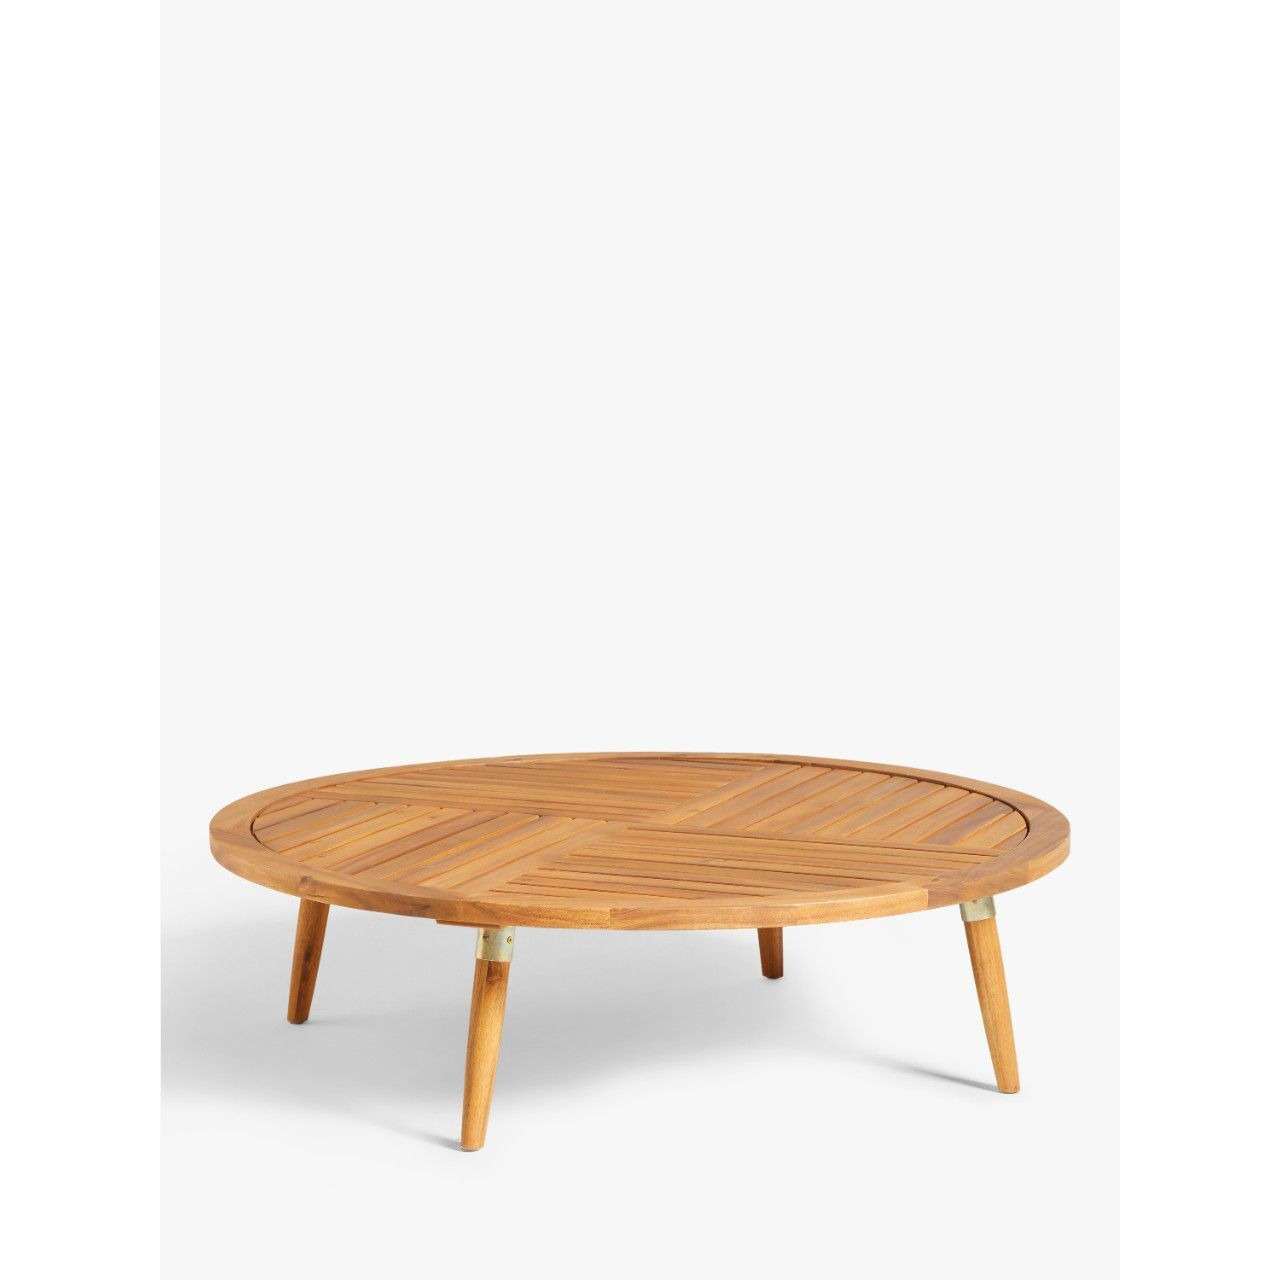 John Lewis + Swoon Franklin Garden Coffee Table, FSC-Certified (Acacia Wood) - image 1